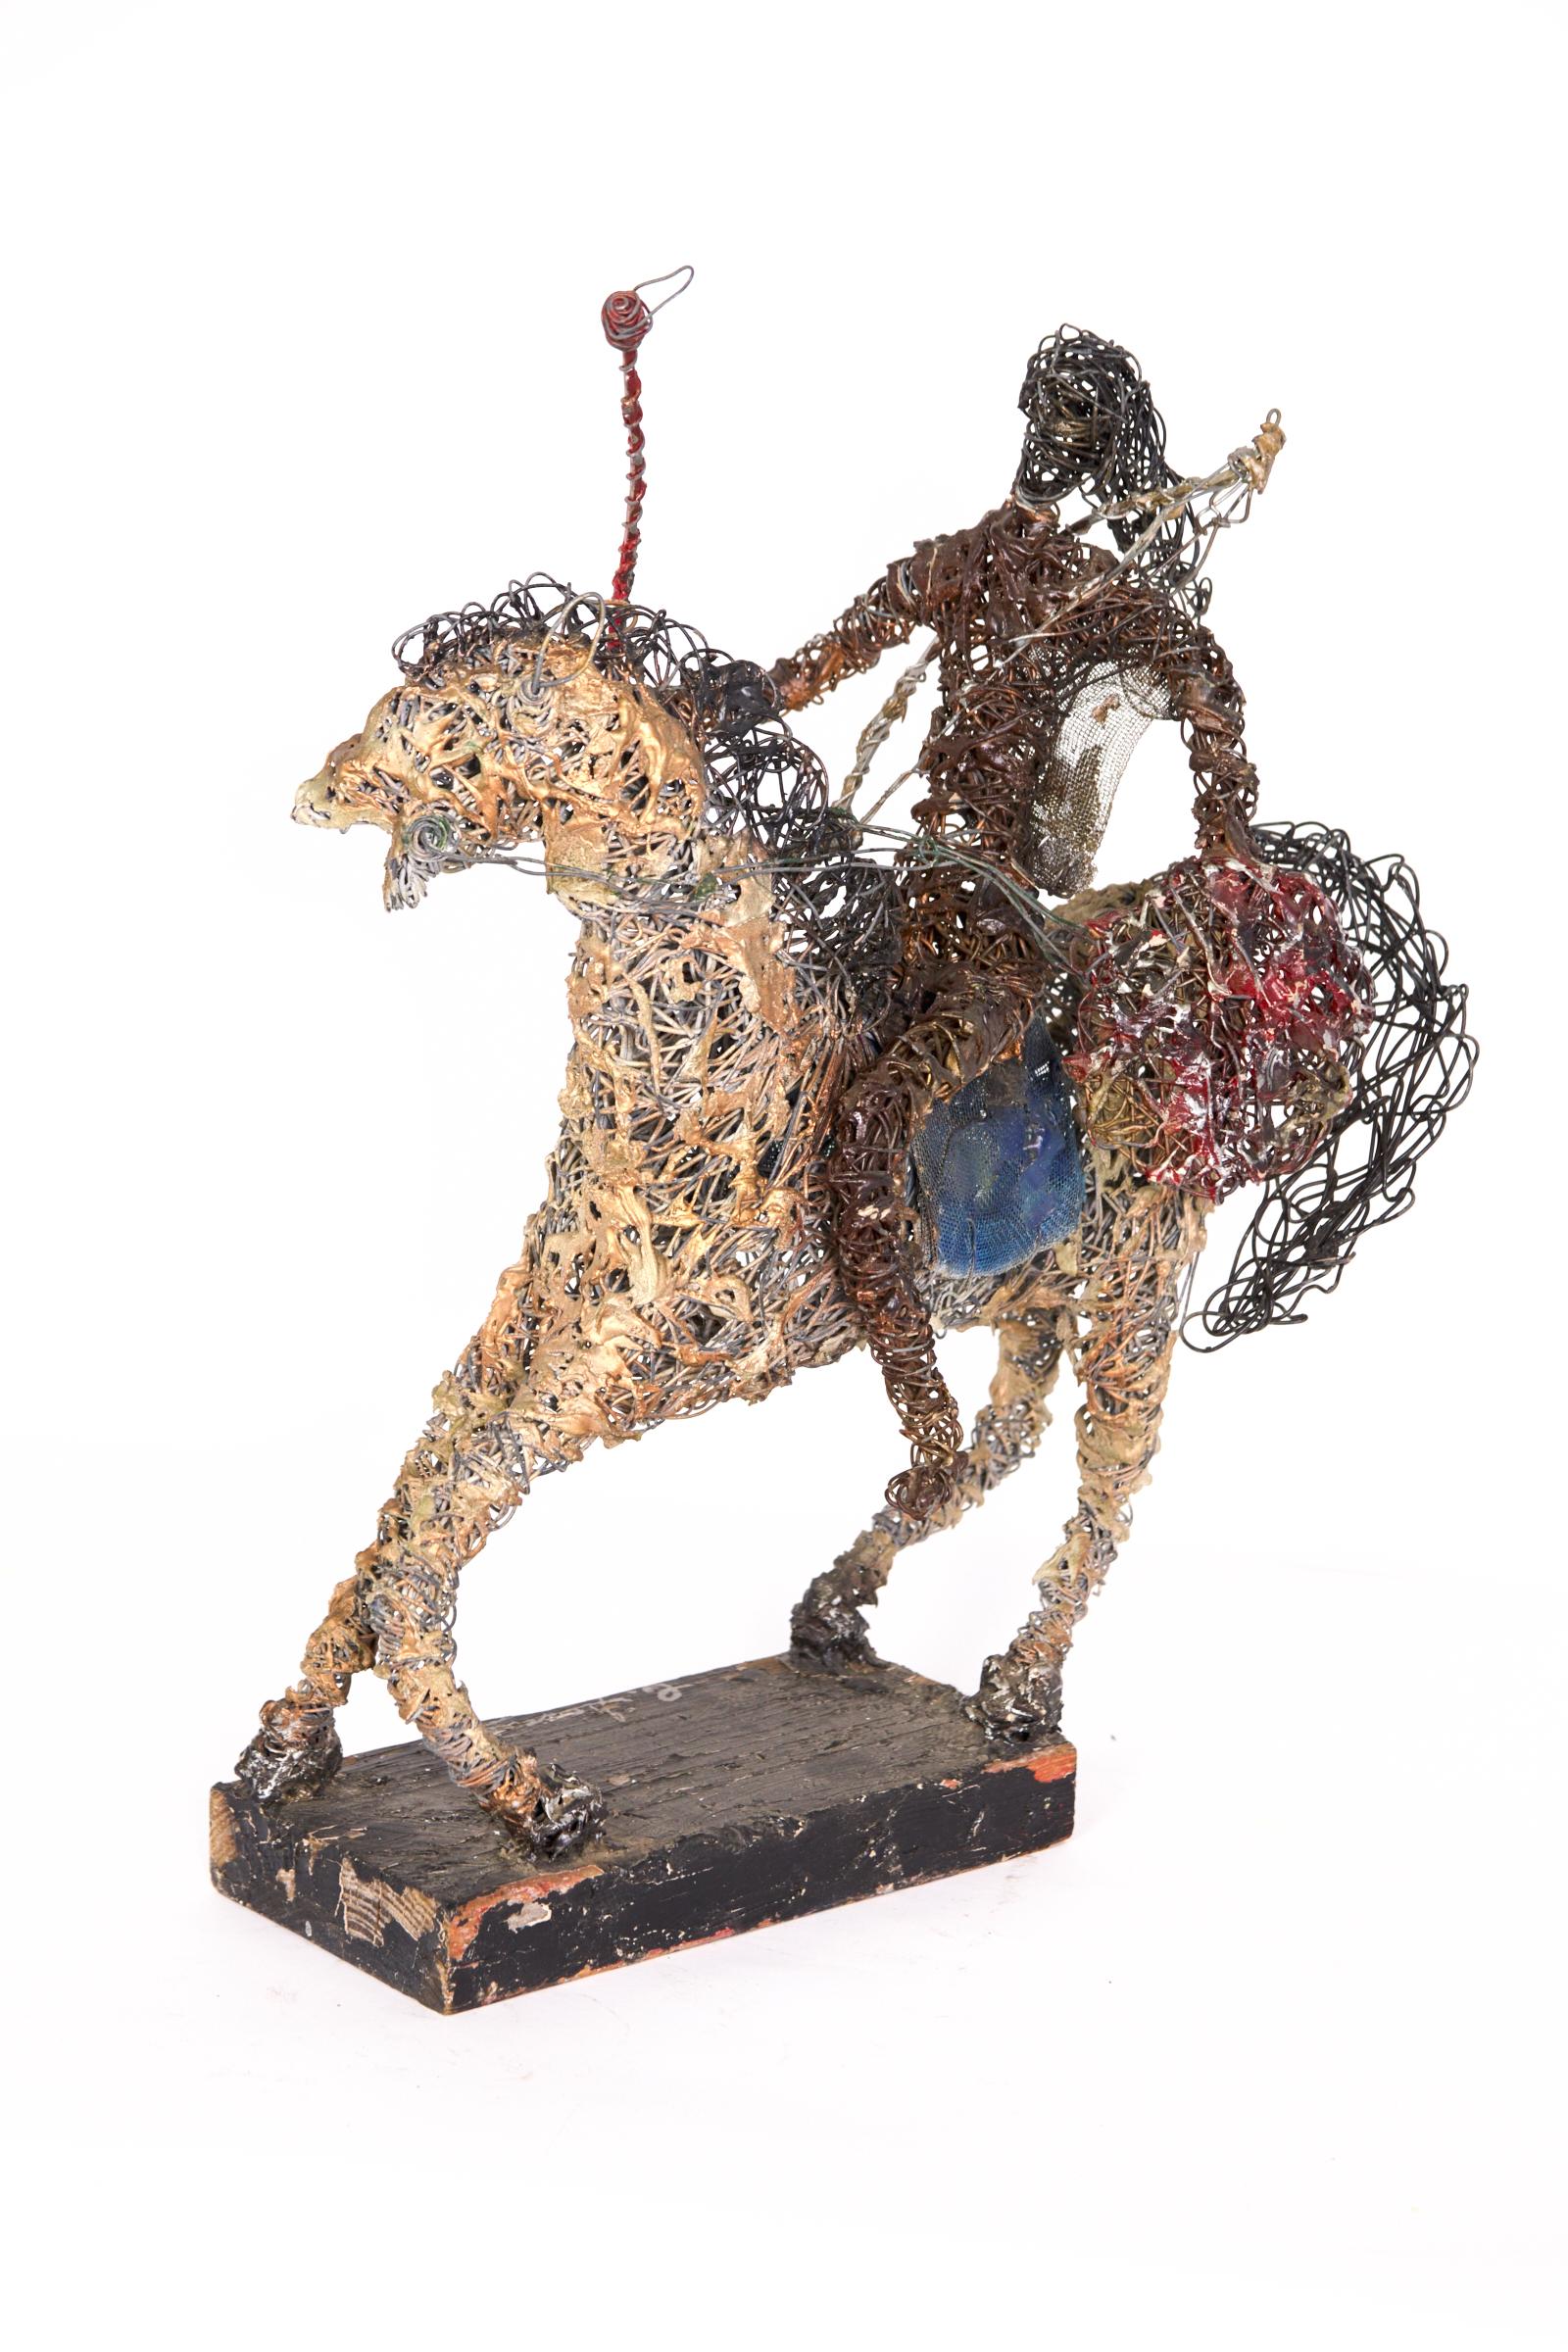 An exceptional unorthodox woven mixed metal statue of a Native American warrior gallivanting across the plains of America on his hollow metal horse. A disorienting weaving sculpture that captures an in-action shot of a Native Soldier in full stride